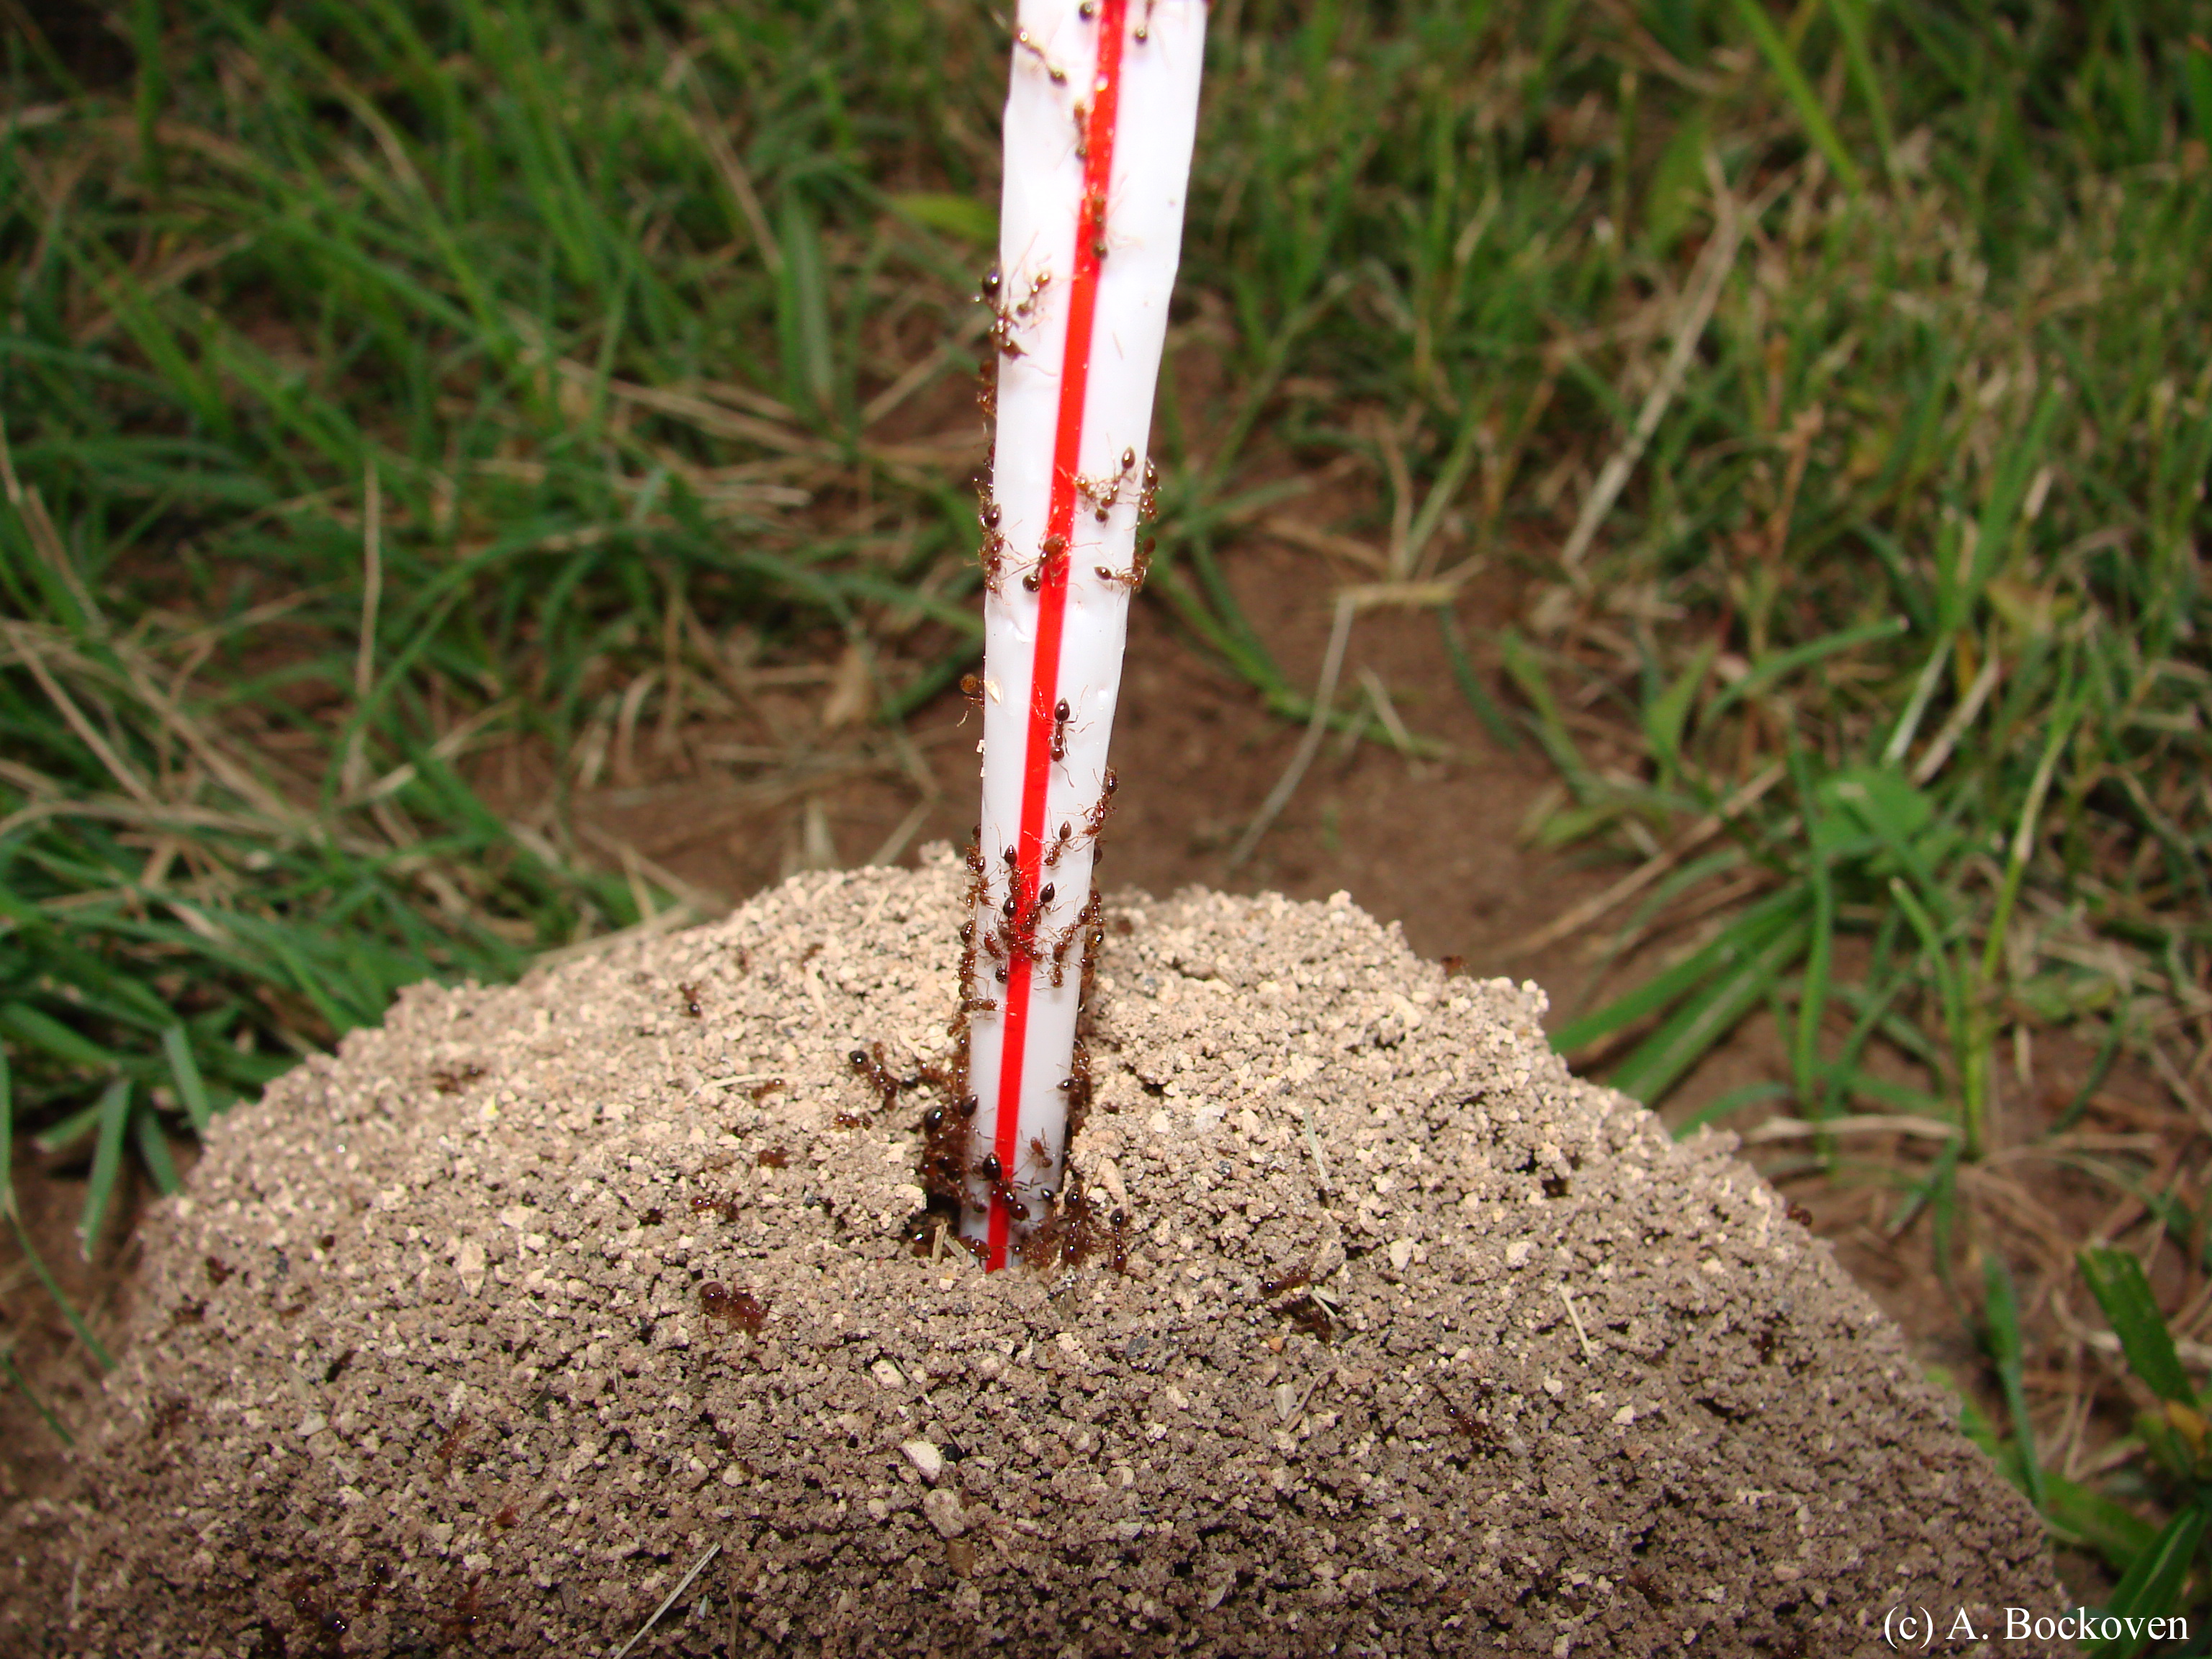 What is the best home remedy to kill fire ants?